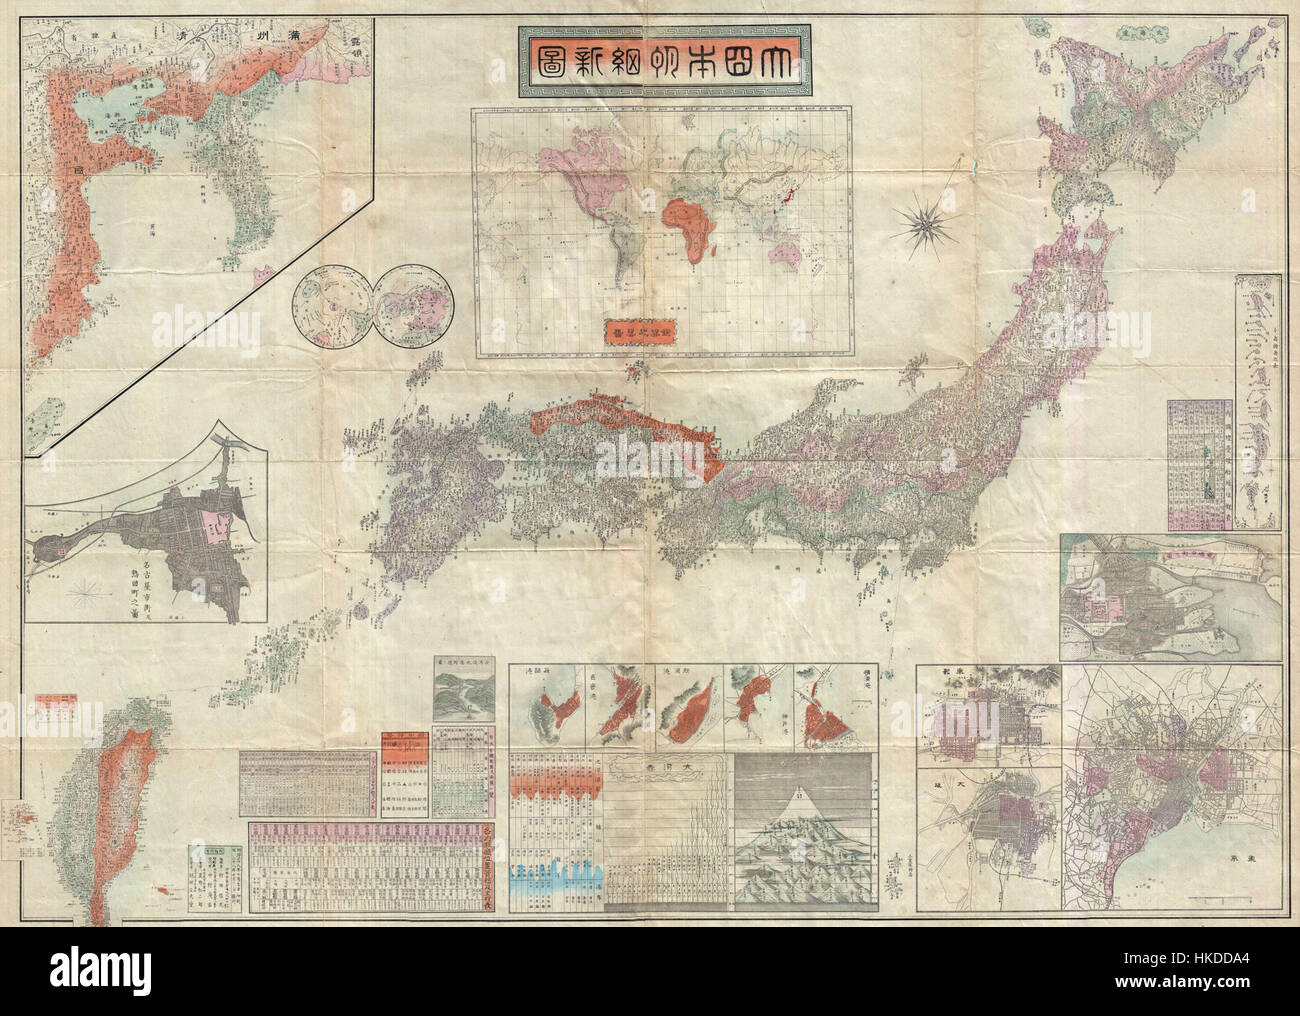 1895 Meiji 28 Japanese Map of Imperial Japan with Taiwan   Geographicus   ImperialJapan meiji28 1895 Stock Photo